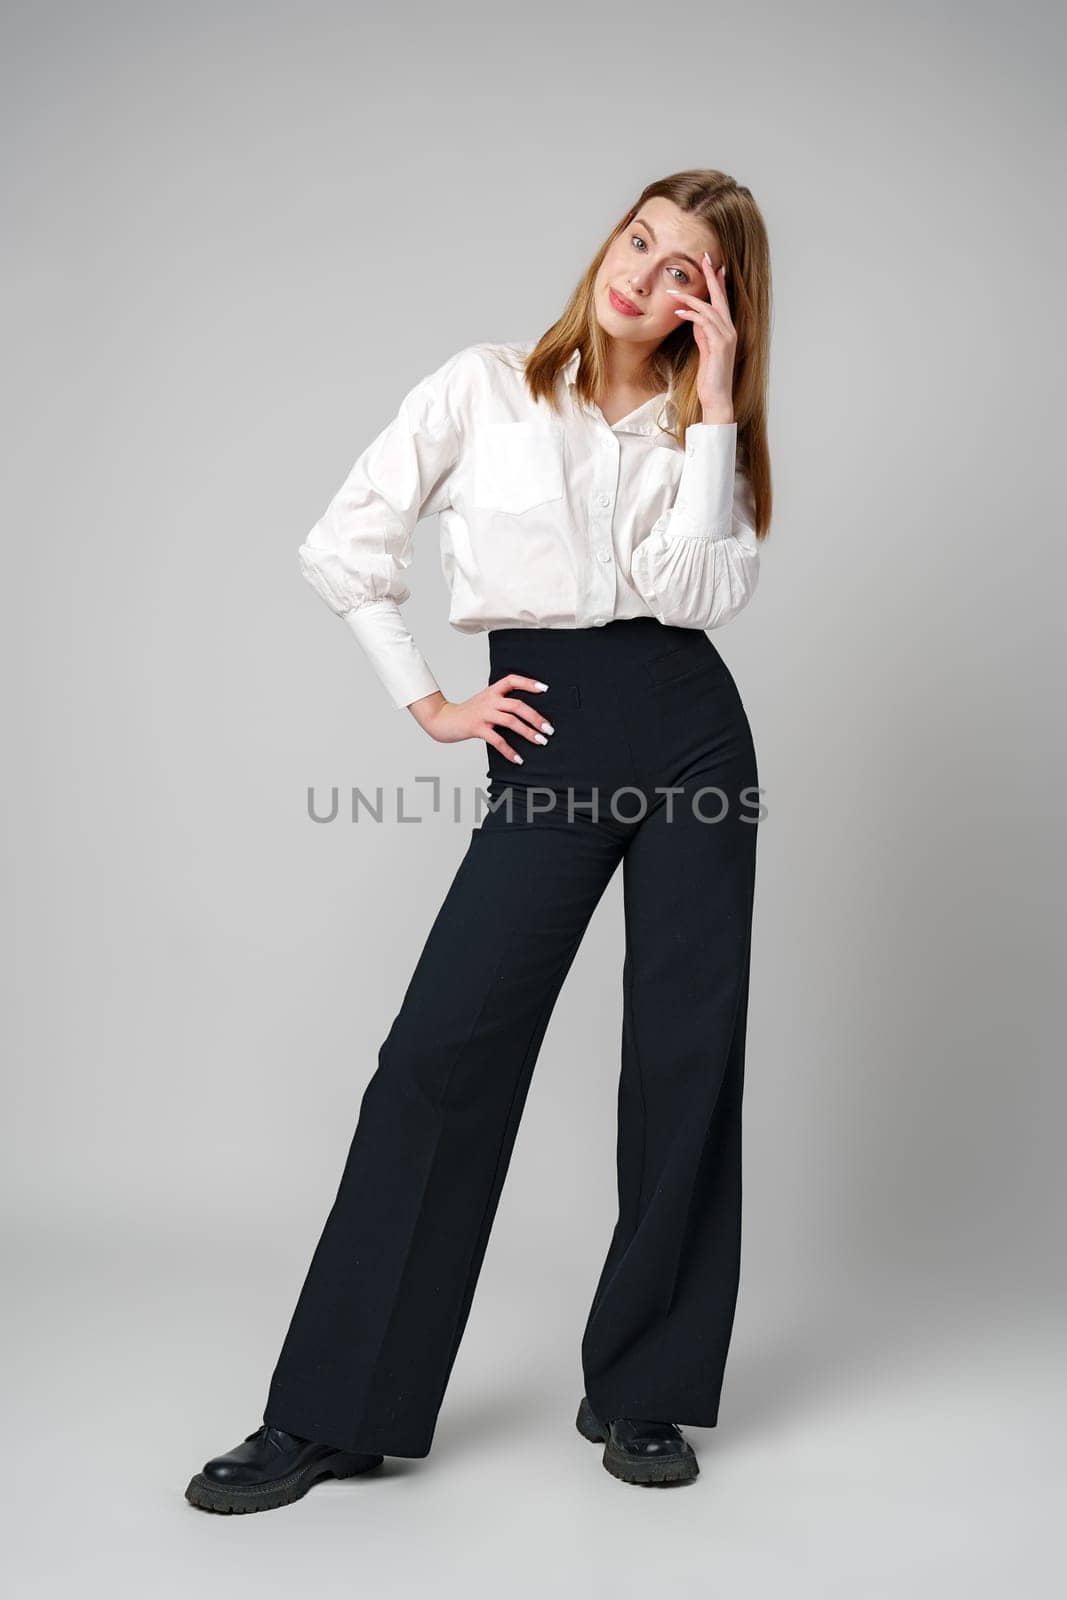 Young Woman in White Shirt Posing for Picture in studio